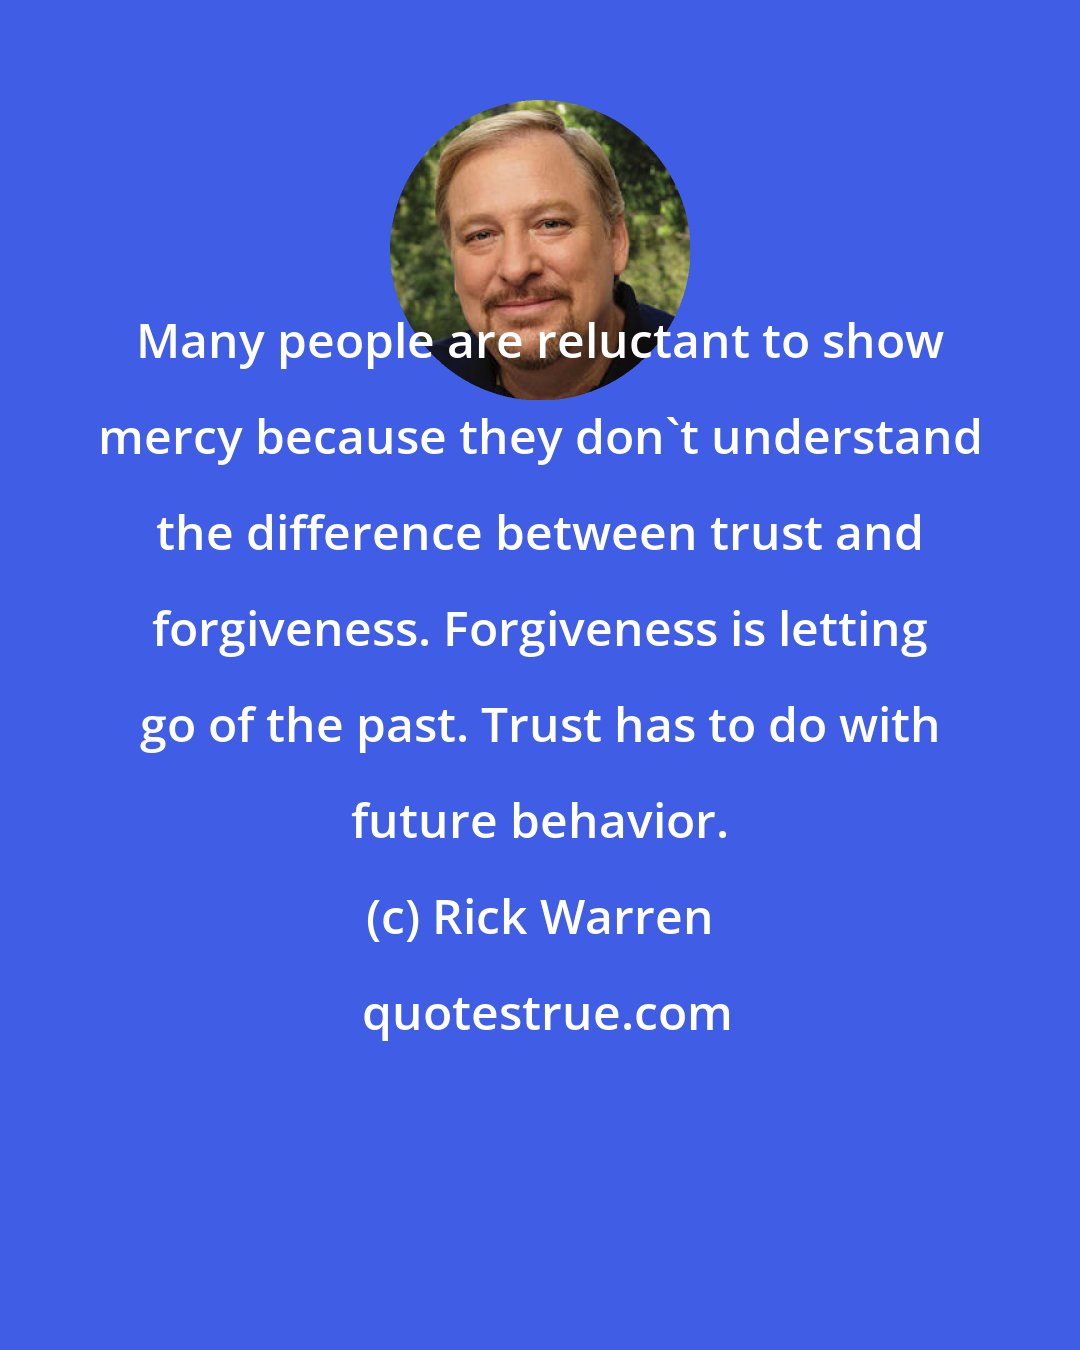 Rick Warren: Many people are reluctant to show mercy because they don't understand the difference between trust and forgiveness. Forgiveness is letting go of the past. Trust has to do with future behavior.